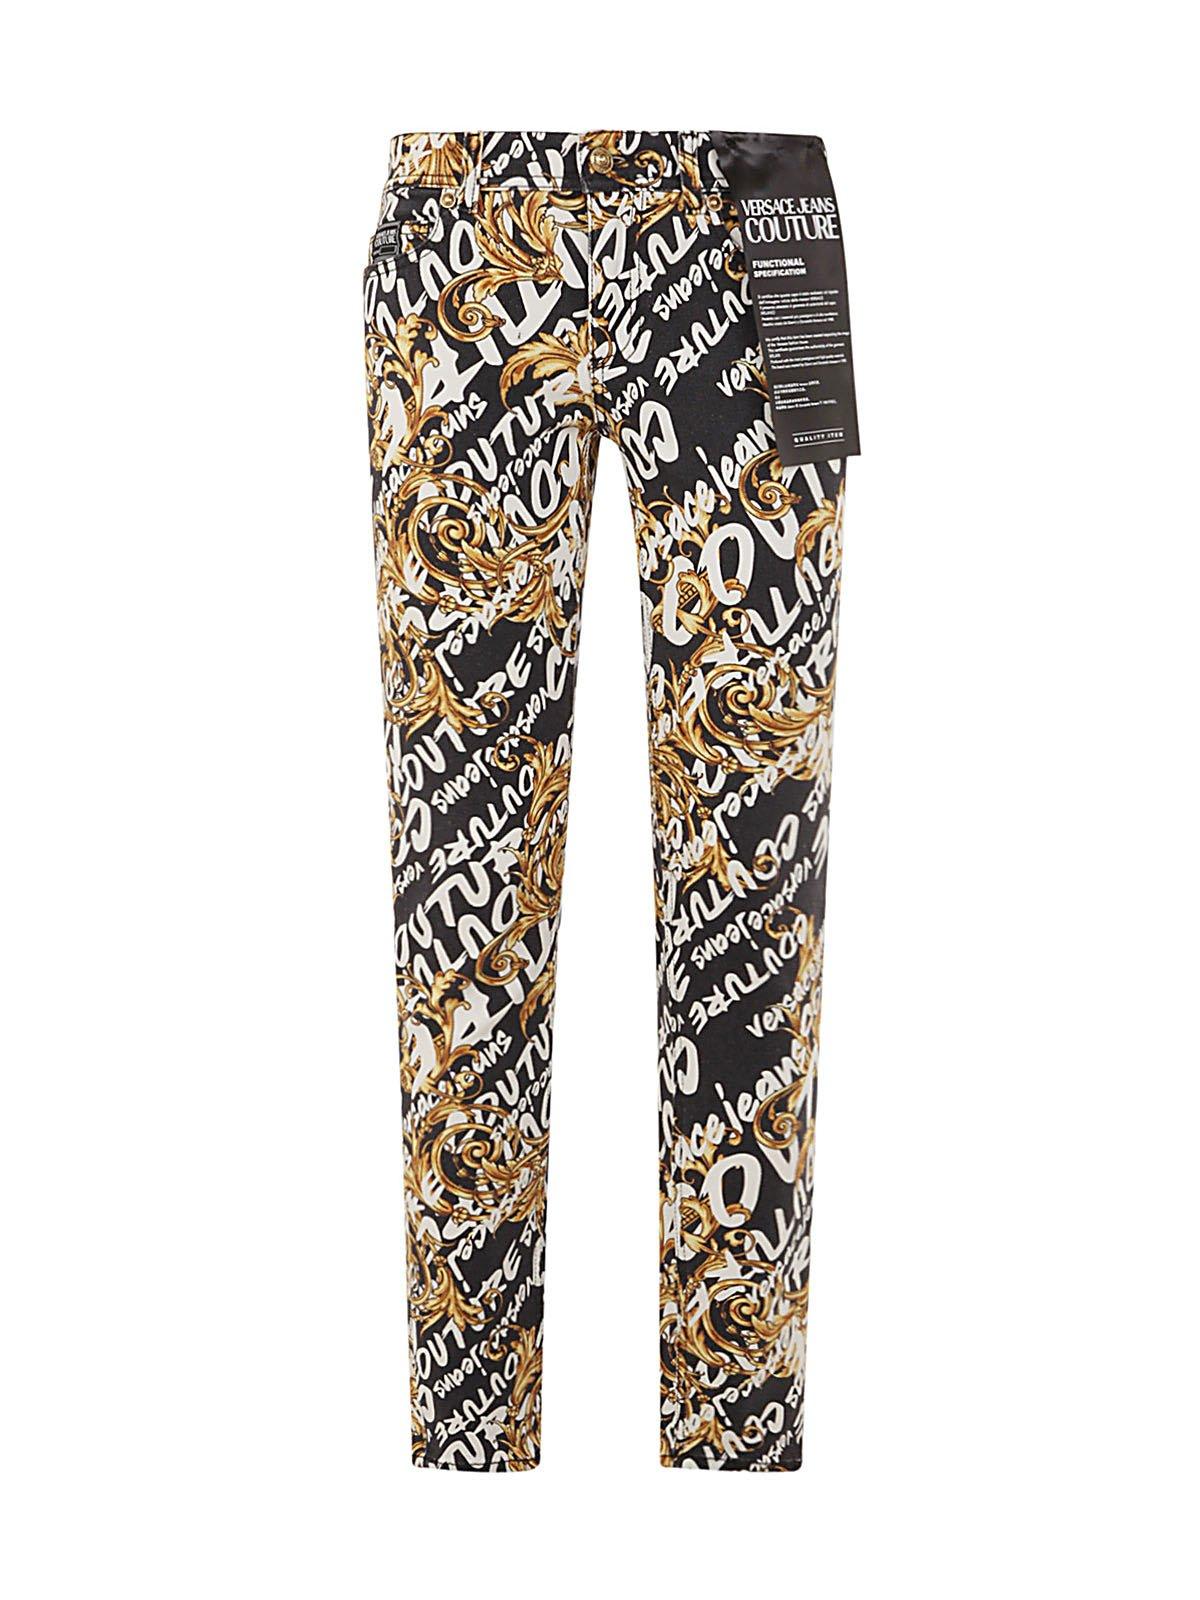 Versace Jeans Couture Graphic Printed Skinny Jeans